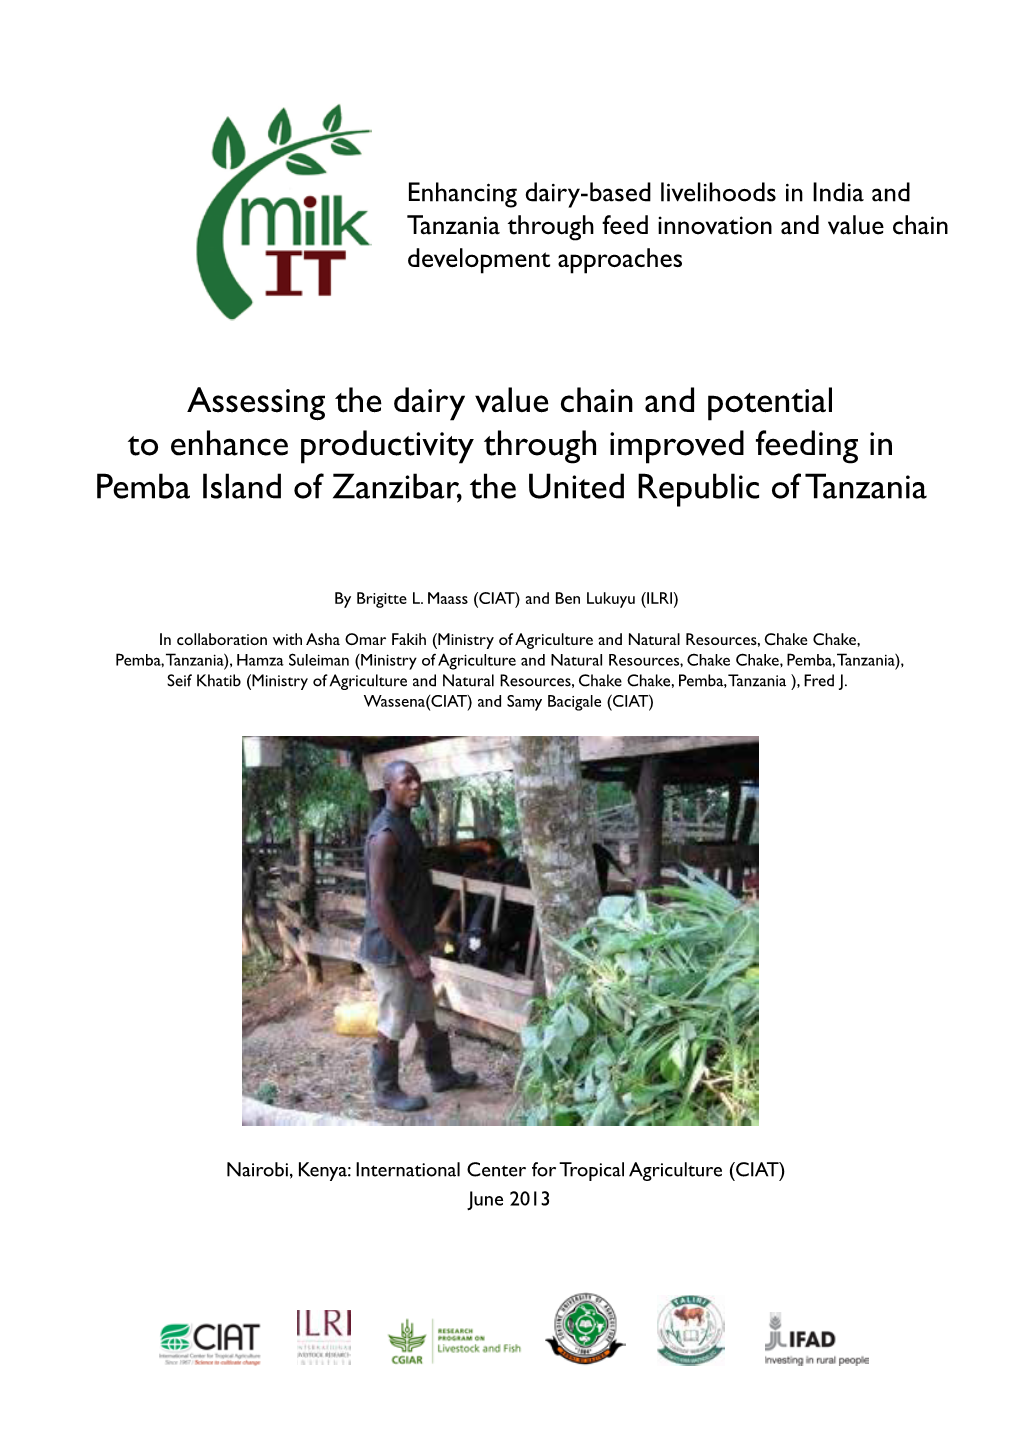 Assessing the Dairy Value Chain and Potential to Enhance Productivity Through Improved Feeding in Pemba Island of Zanzibar, the United Republic of Tanzania